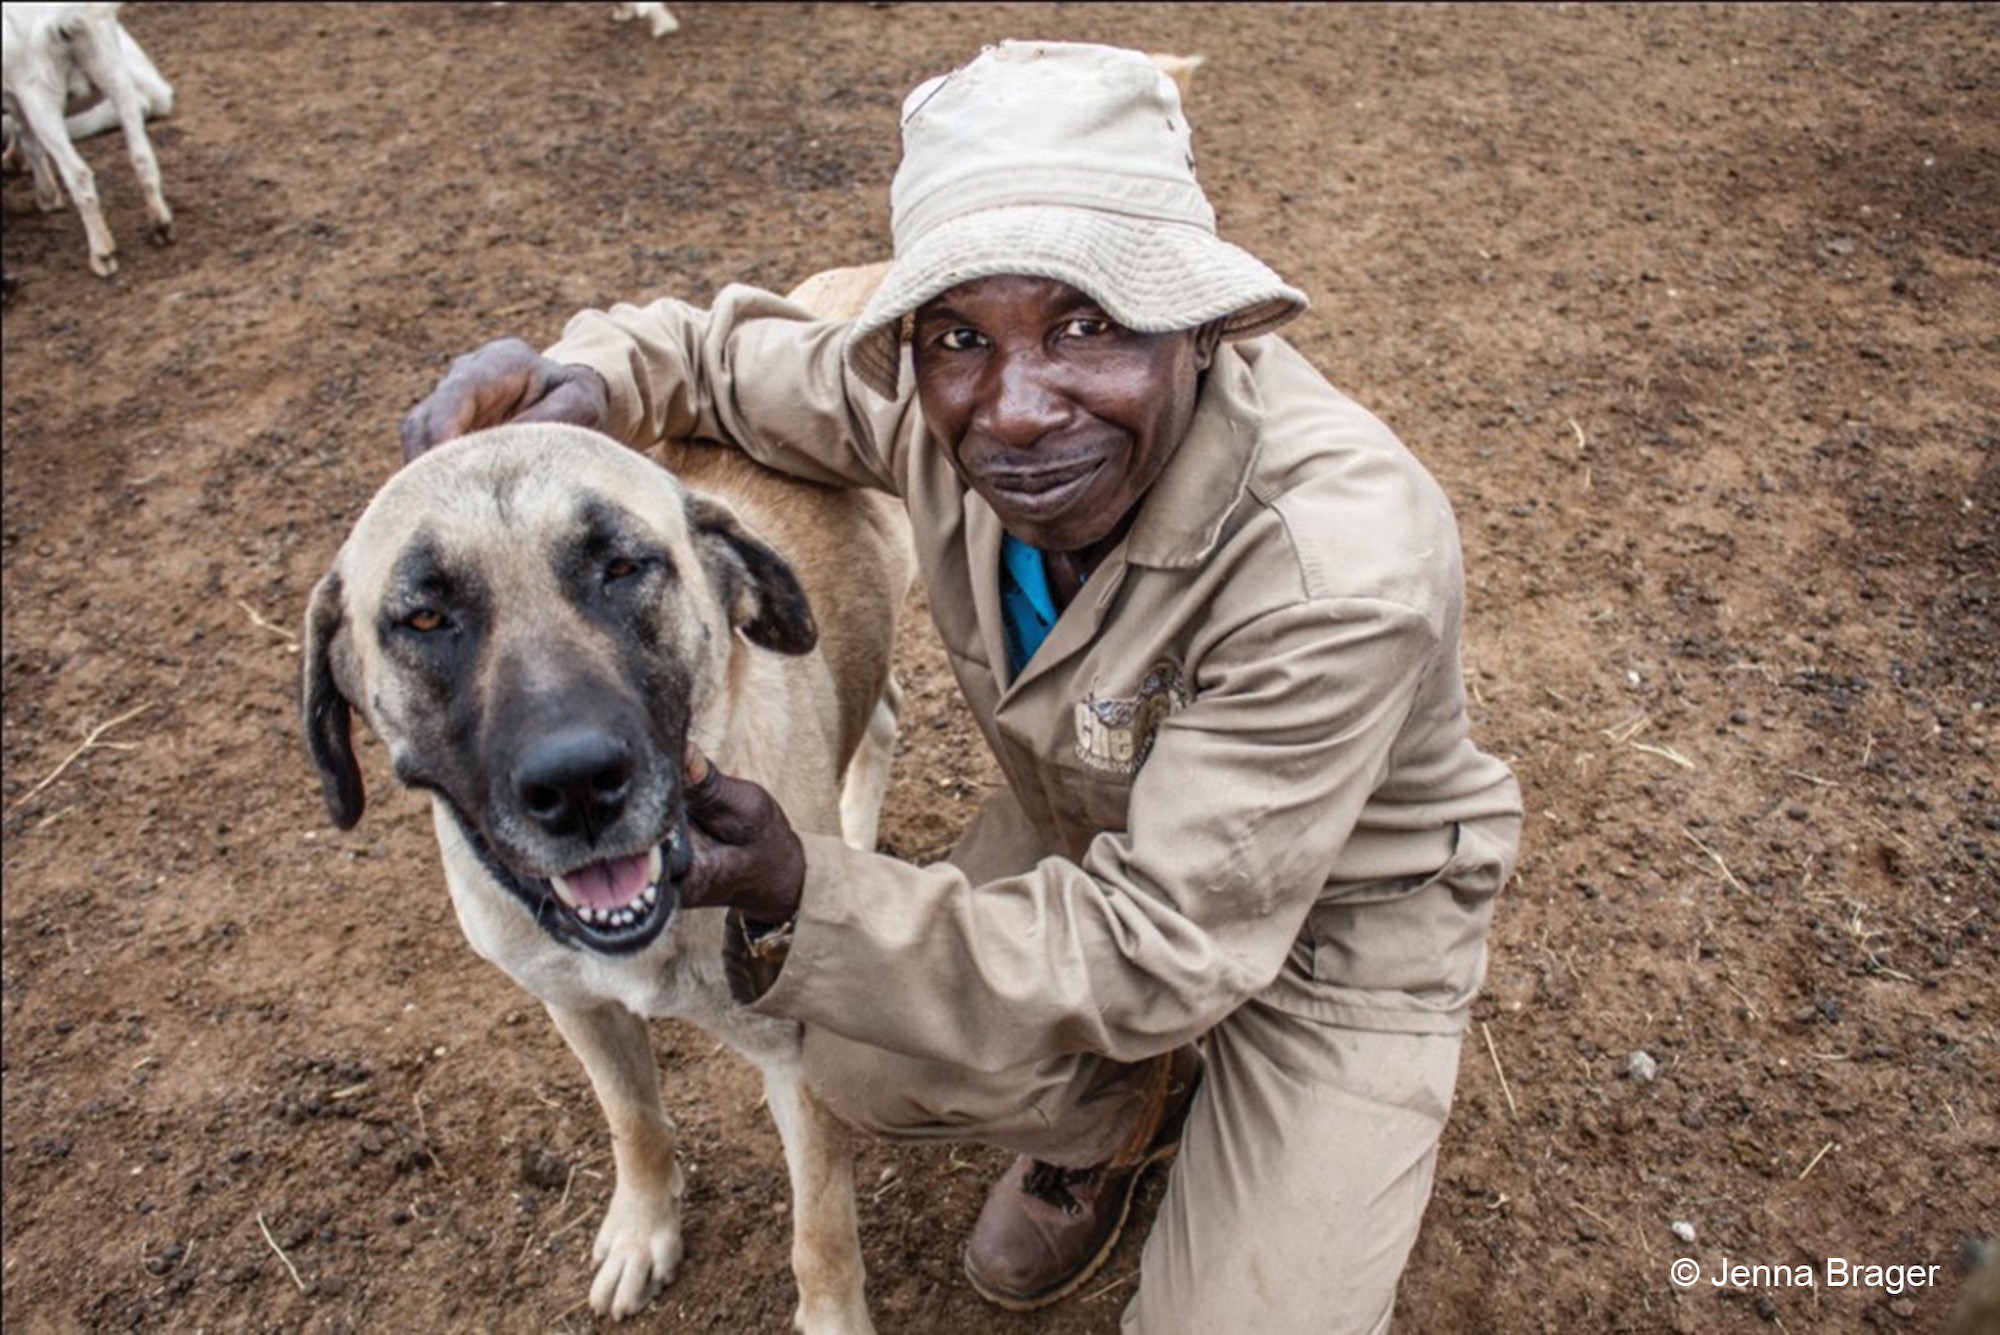 Armas the herder smiles while hugging a guarding dog